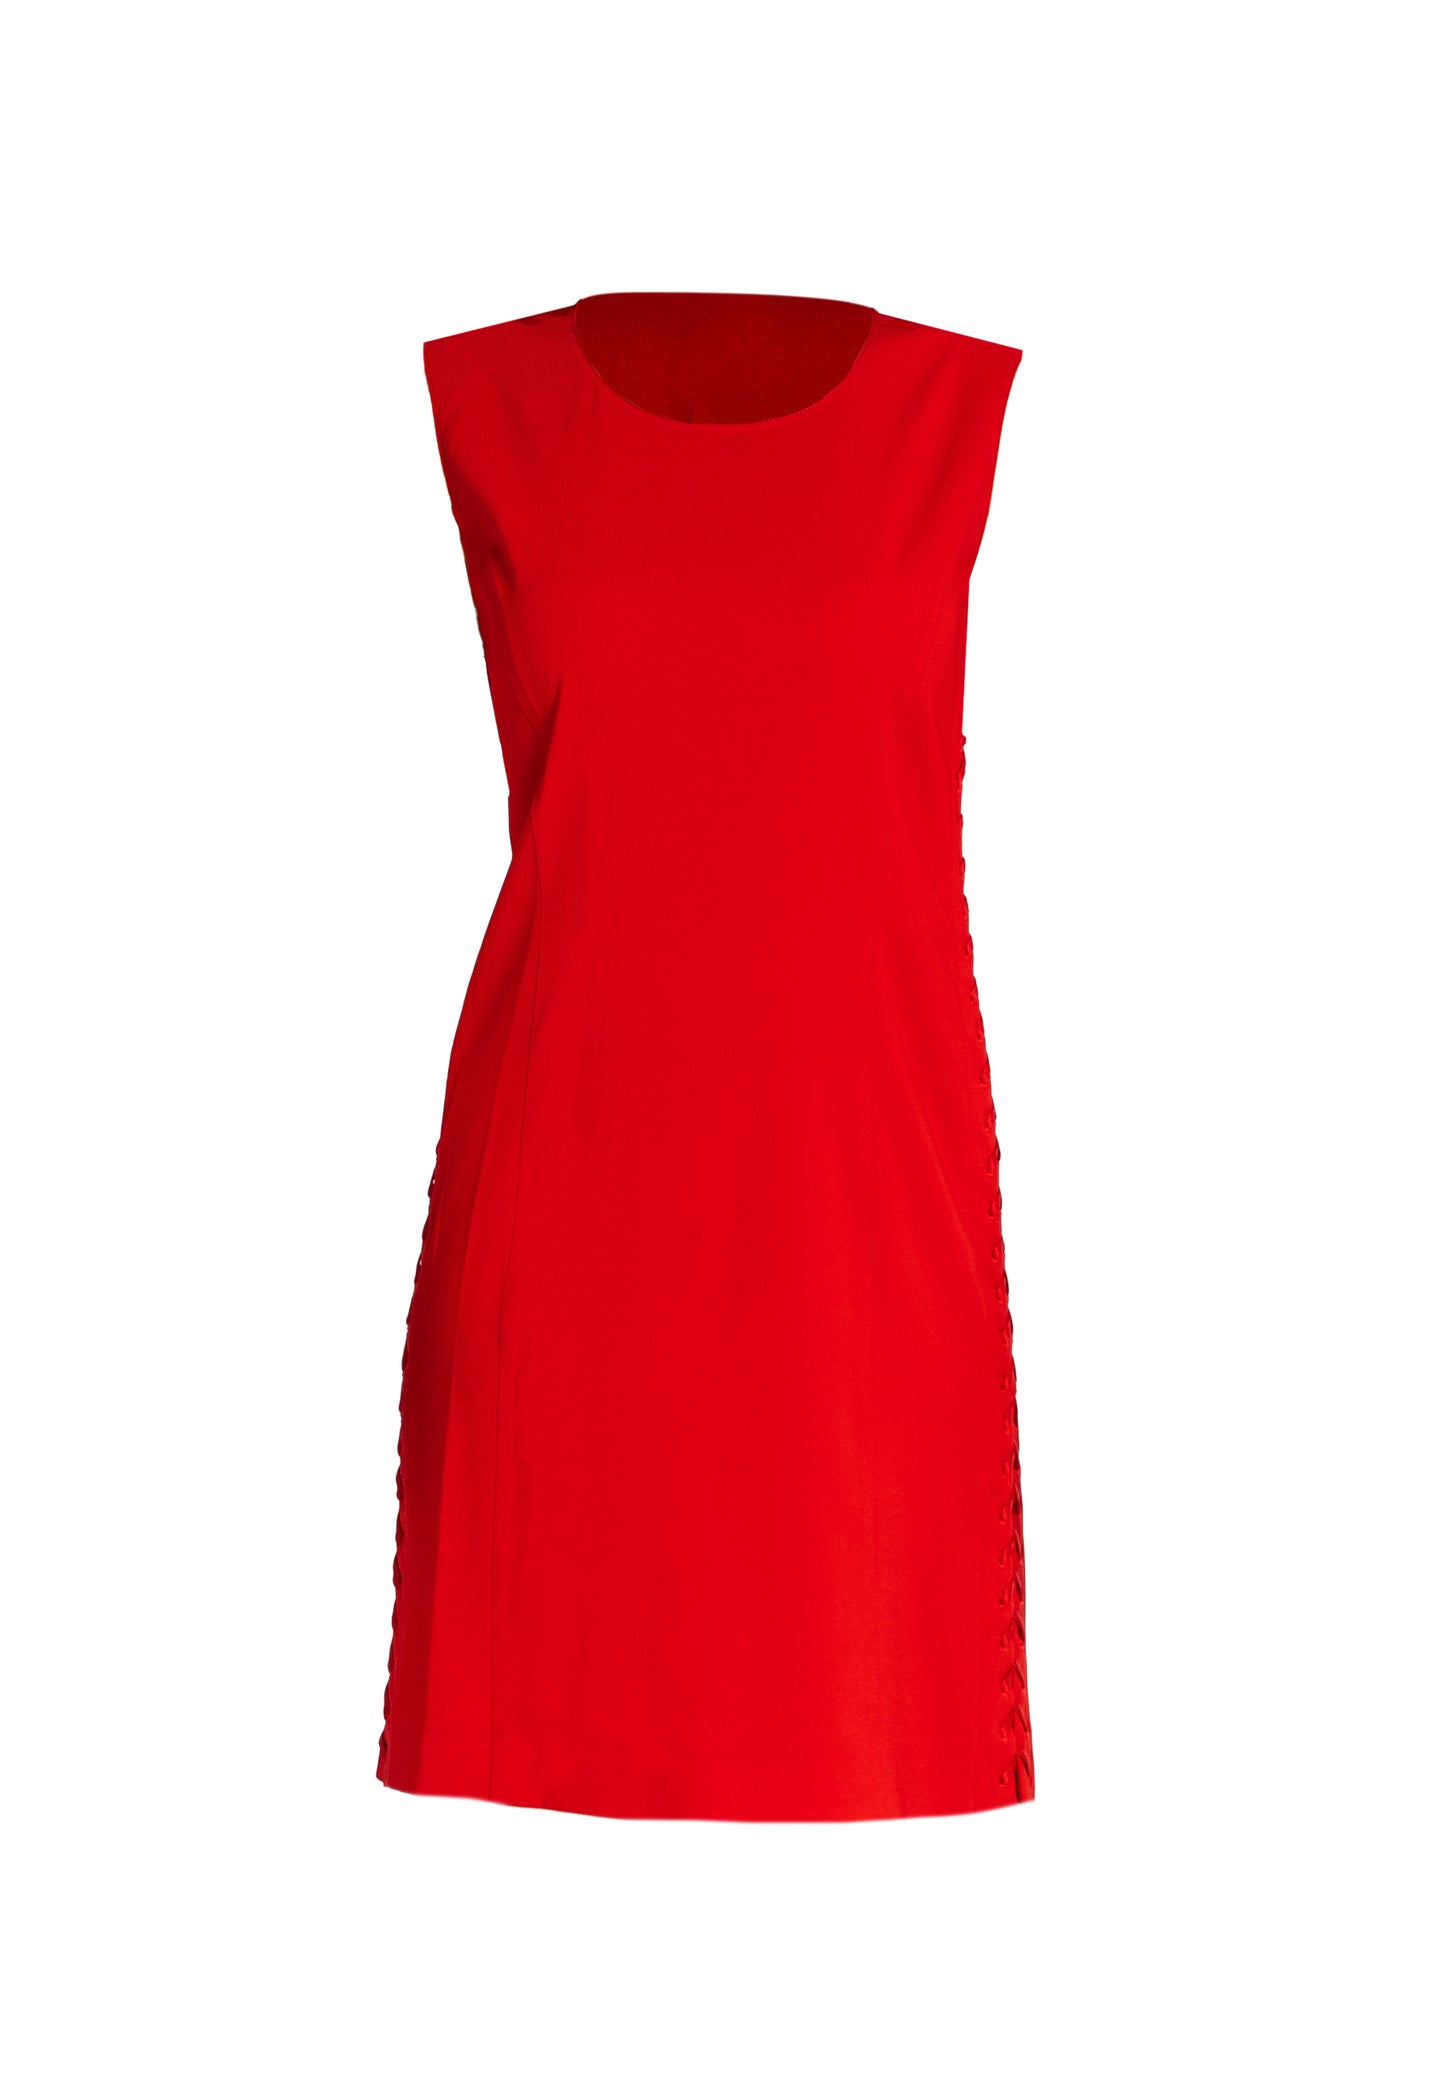 sustainable dresses australia  red dress with side laces  Side slotted sheath dress sheath dress australia sheathdress red women cut out dress  red dress  made in italy clothing designer dress  italian design dresses Red side lace Red mide dress  sleeveless red dress  red sleeveless dress winter dresses Australia 